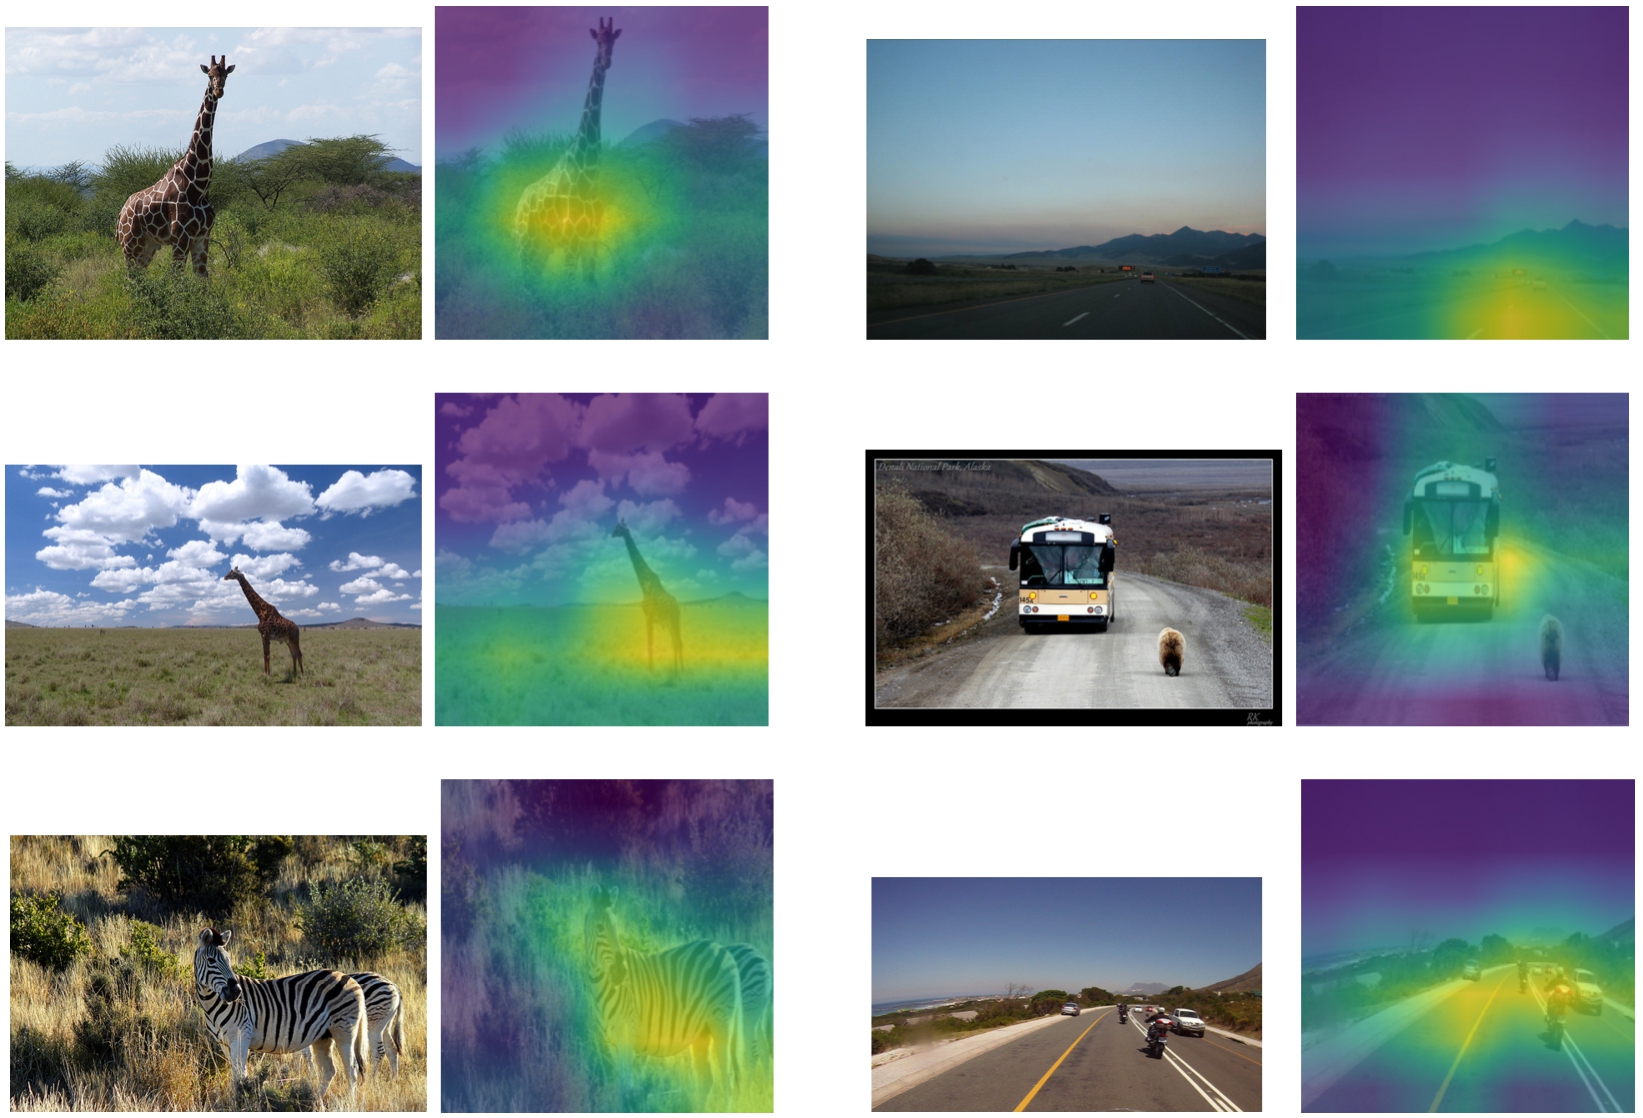 Images from the visual genome dataset and their saliency maps produced by Score-CAM. Images on the left were classified as “Desert Road” and images on the right as “Desert Sand”.